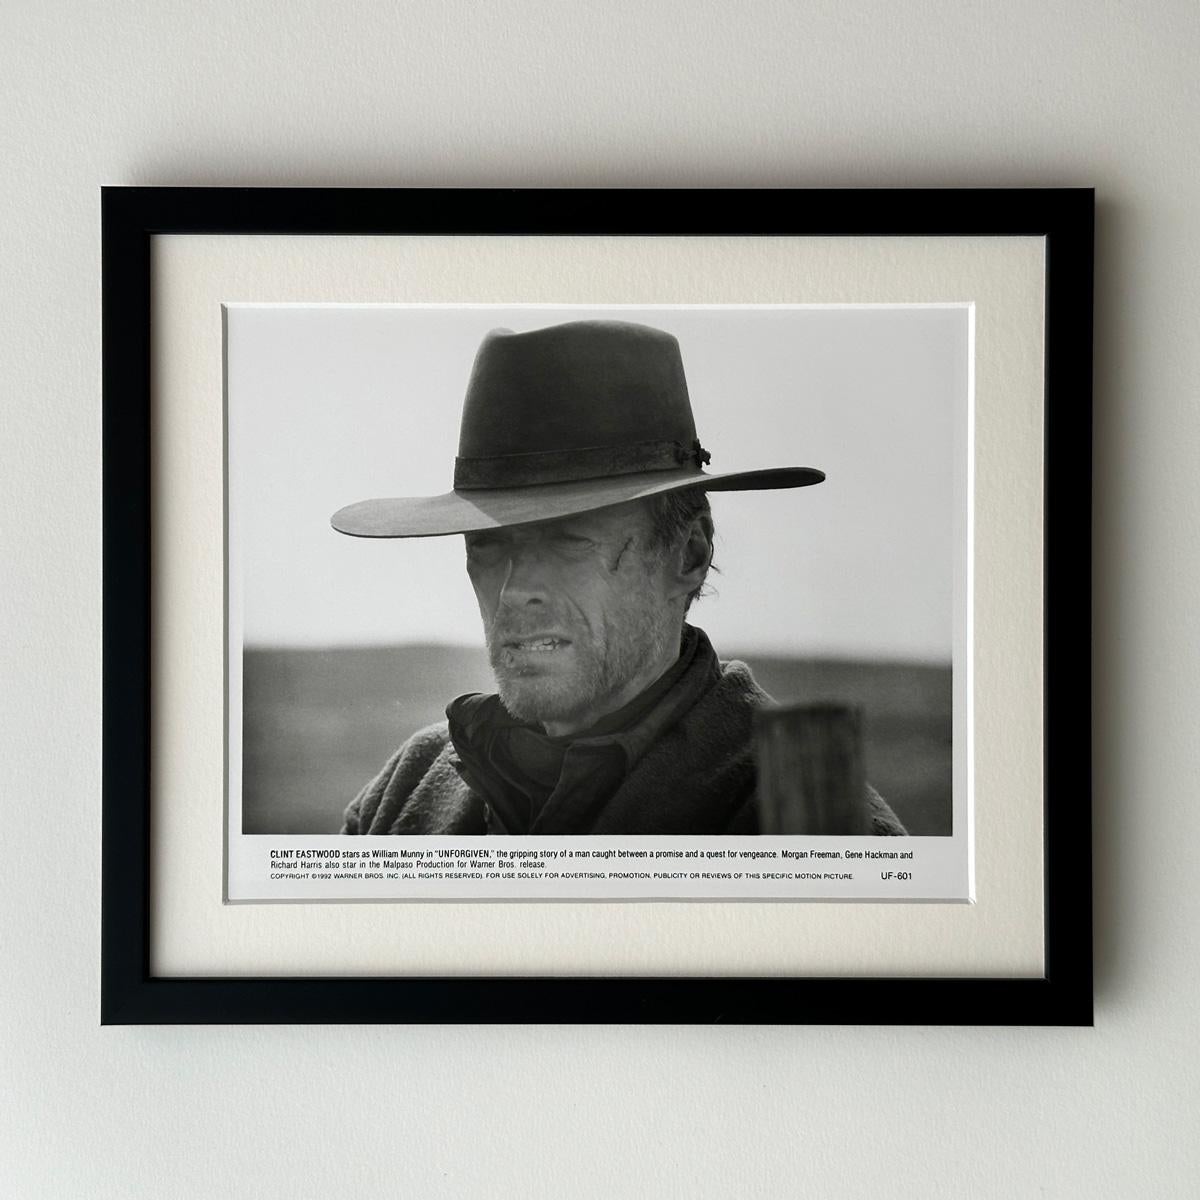 Original Warner Bros 8x10 inches Publicity Still for Clint Eastwood's Unforgiven (1992). Unforgiven bagged 4 Oscars, including Best Picture and Best Director for Eastwood. 

Publicity (film/production) stills were created to help studios promote